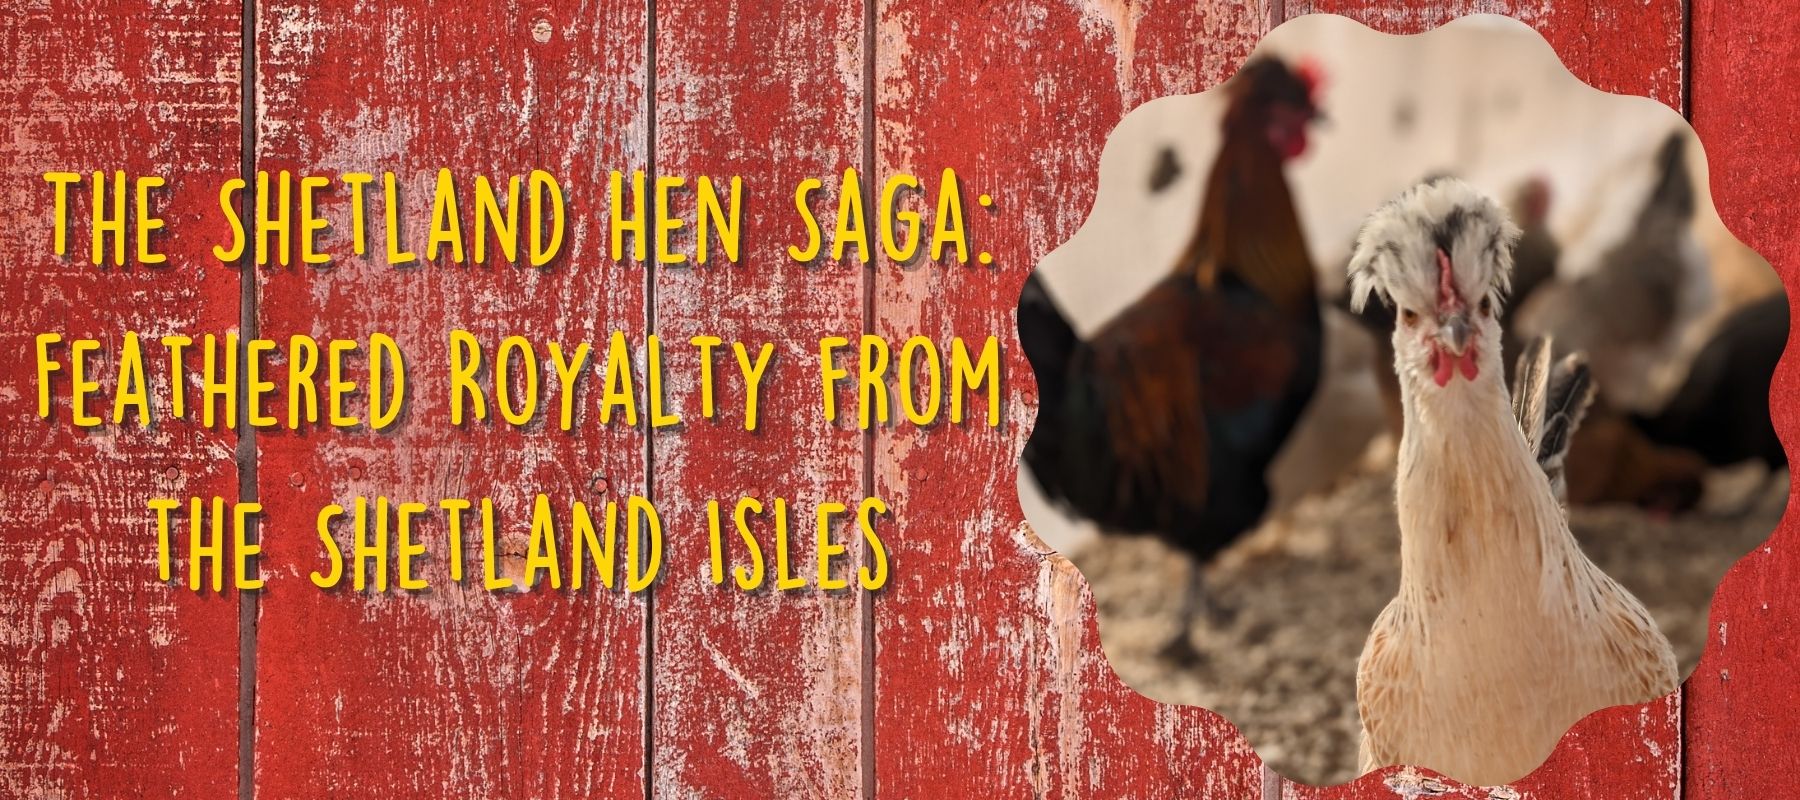 The Shetland Hen Saga: Feathered Royalty from the Shetland Isles - Cluck It All Farms